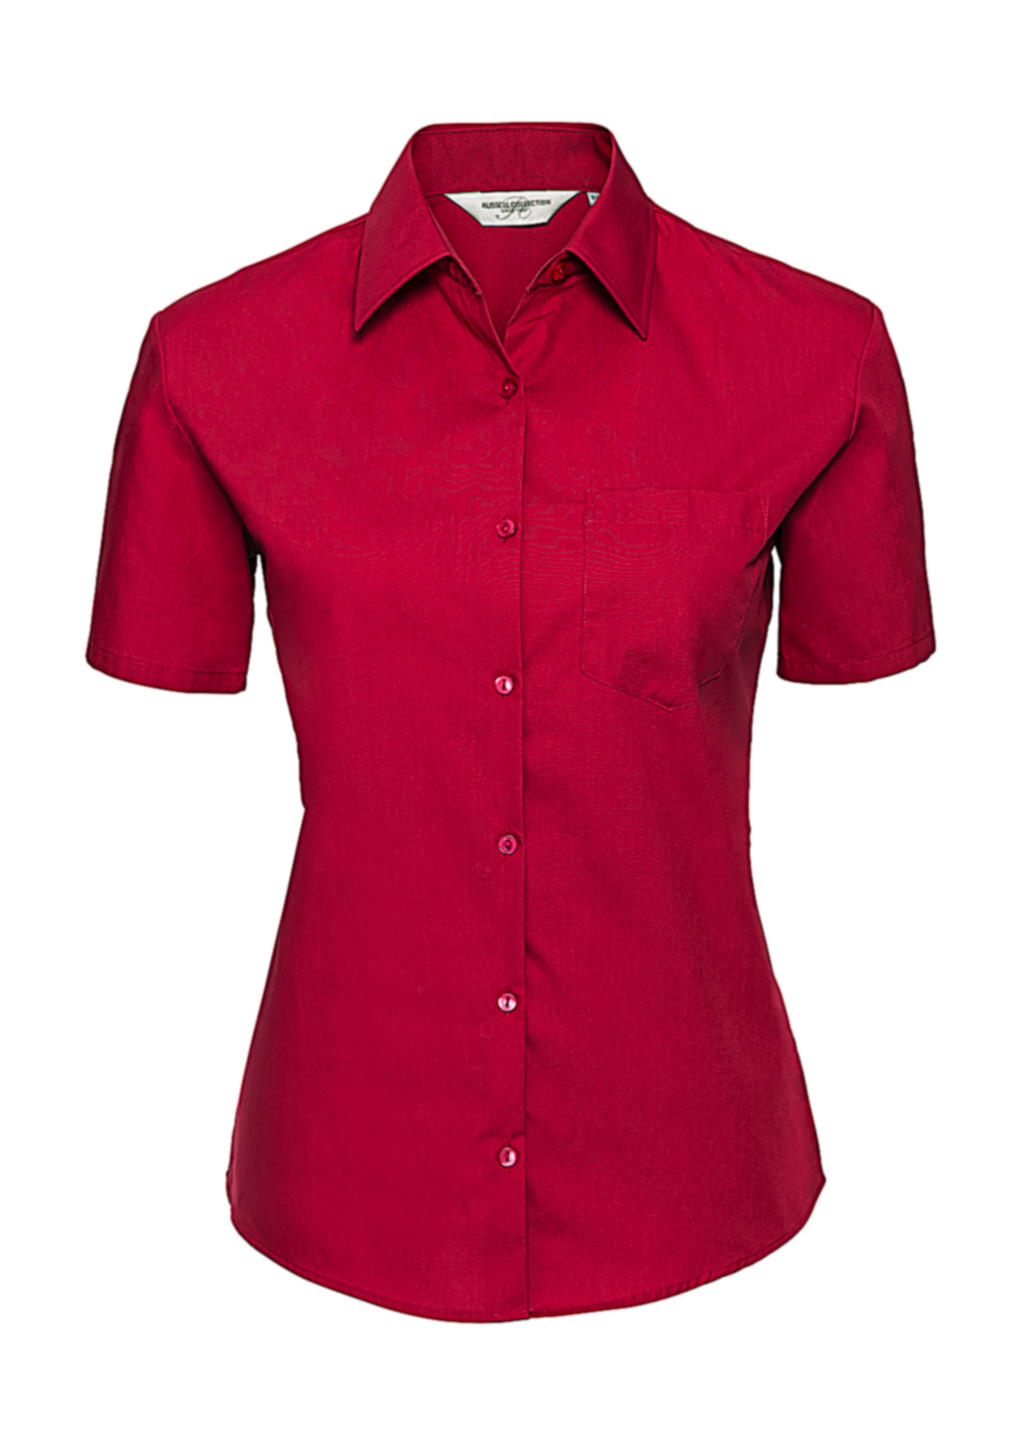  Ladies Cotton Poplin Shirt in Farbe Classic Red